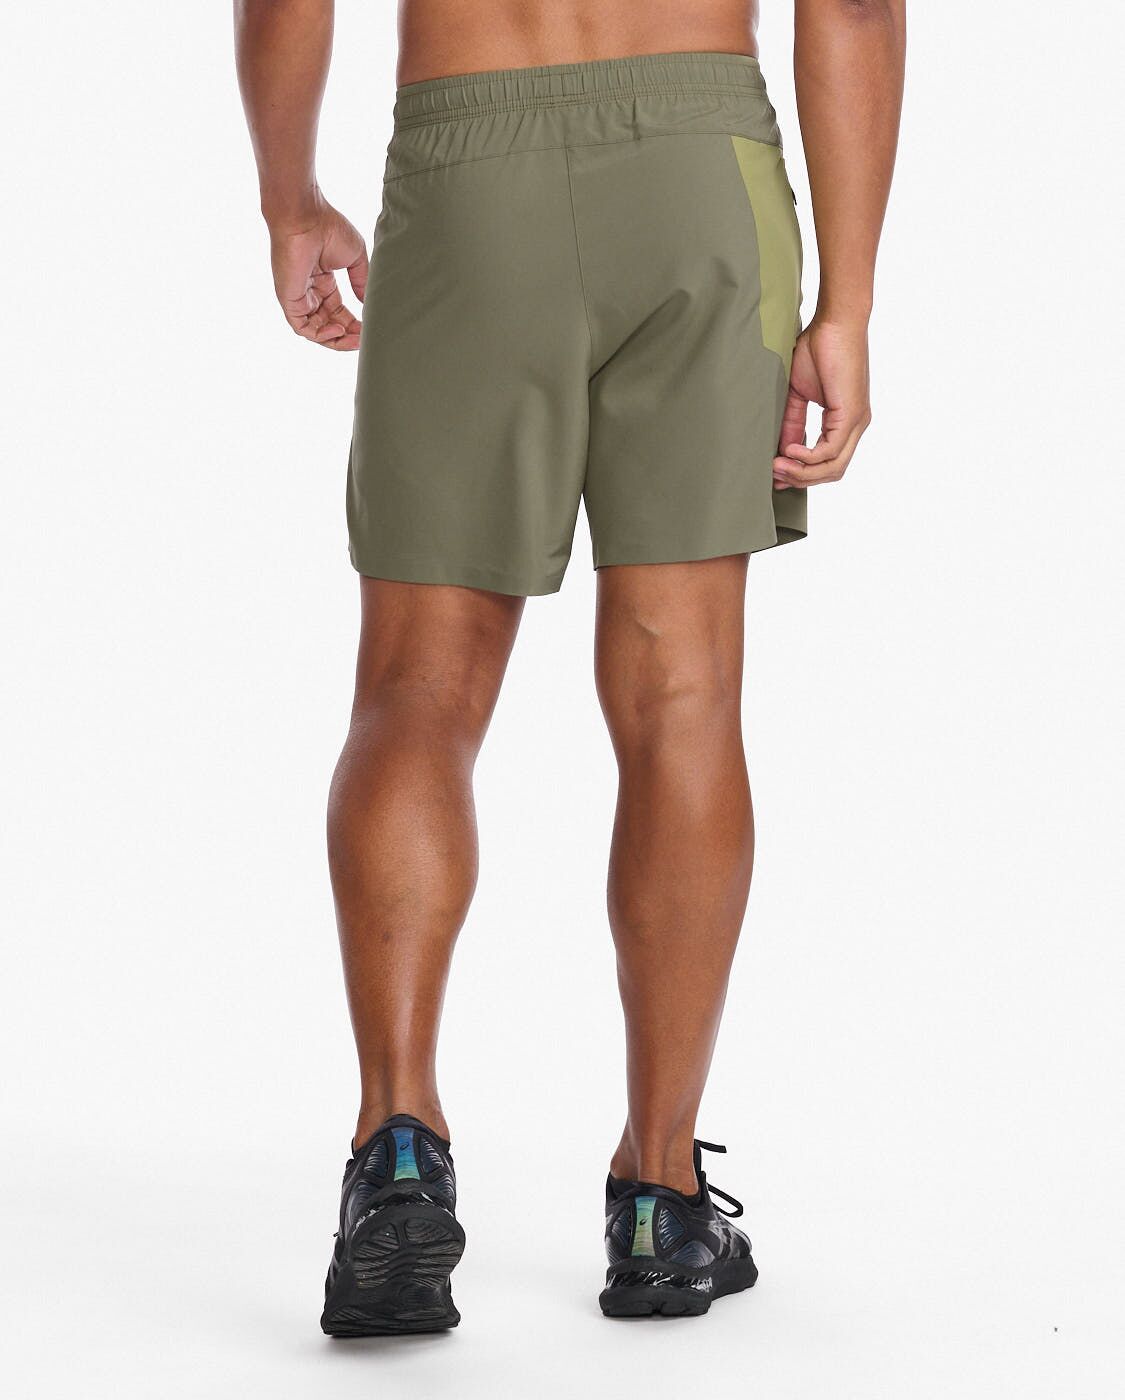 2XU South Africa - Mens Motion 6 inch Shorts - Alpine/Glade